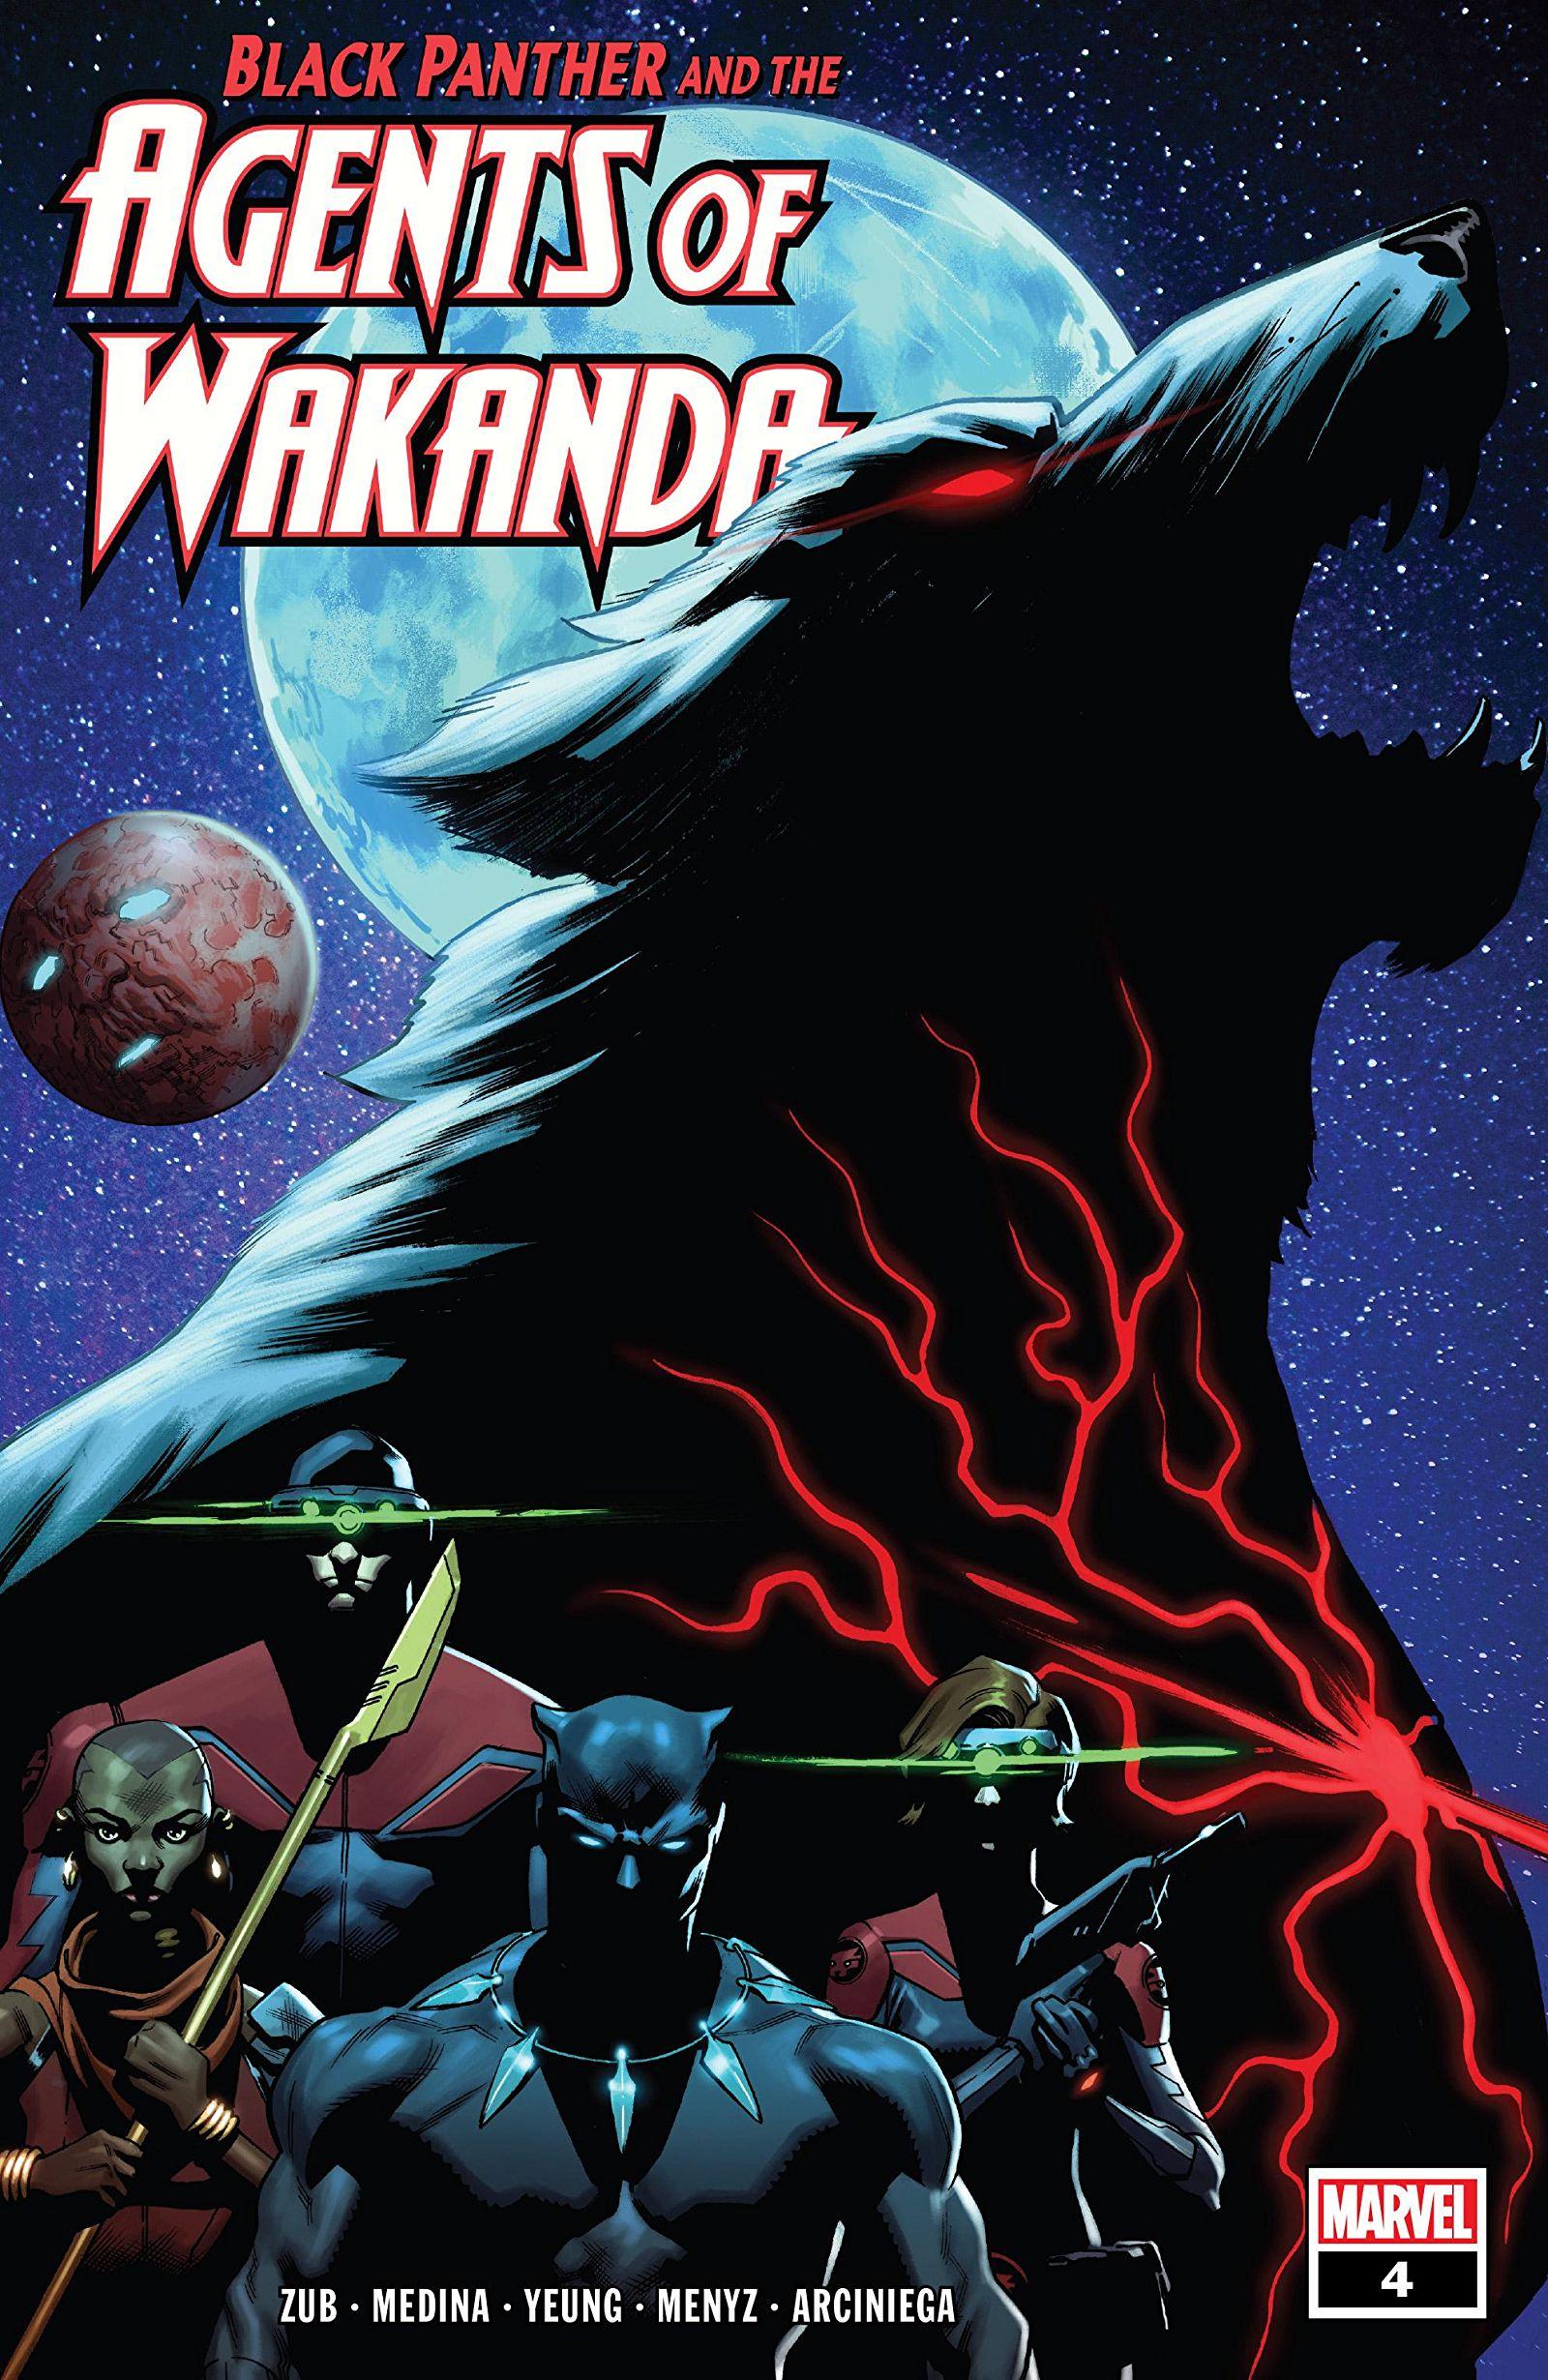 Black Panther and the Agents of Wakanda Vol. 1 #4